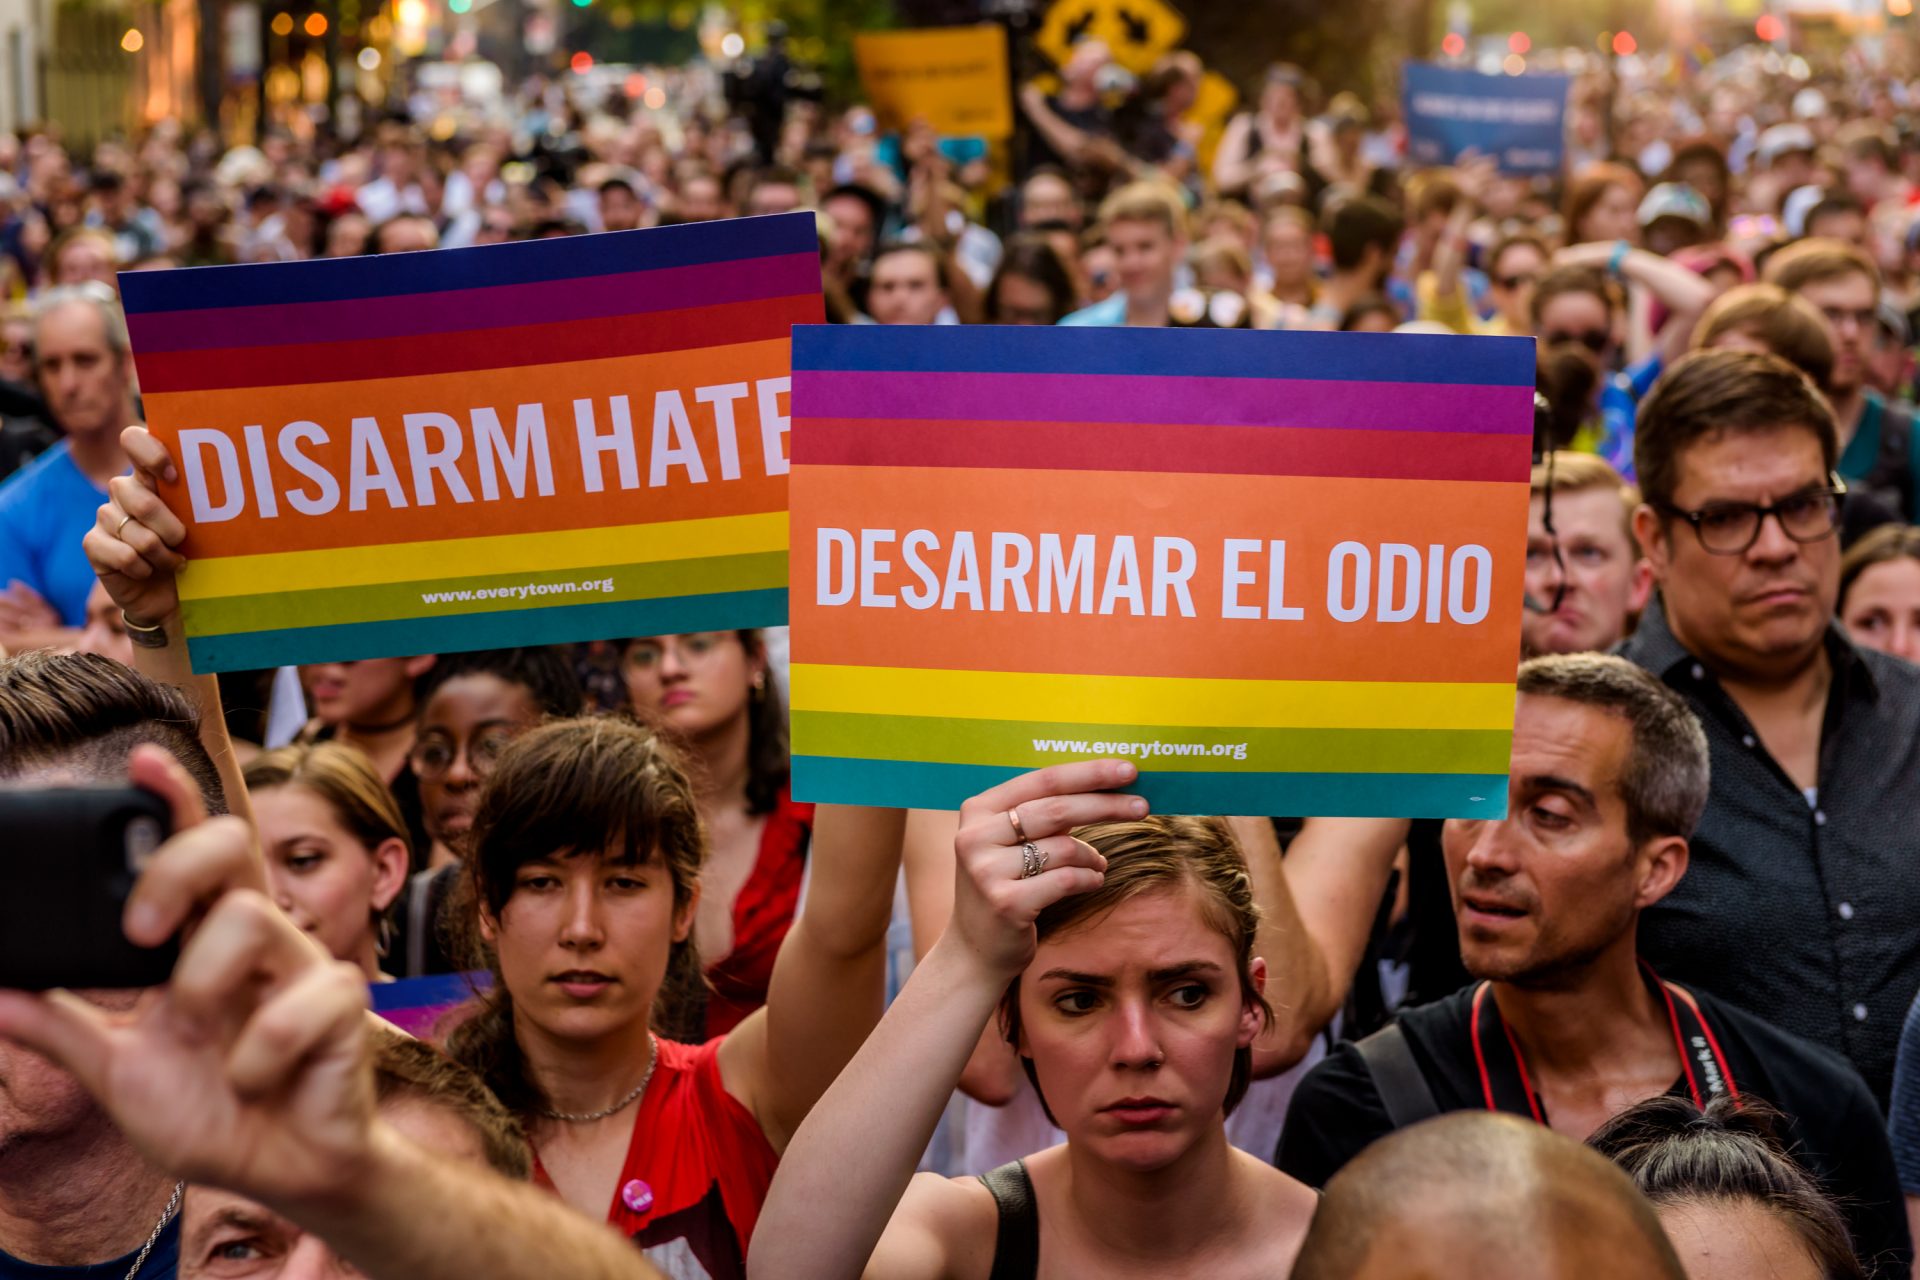 The dark history of the Pride March in photos